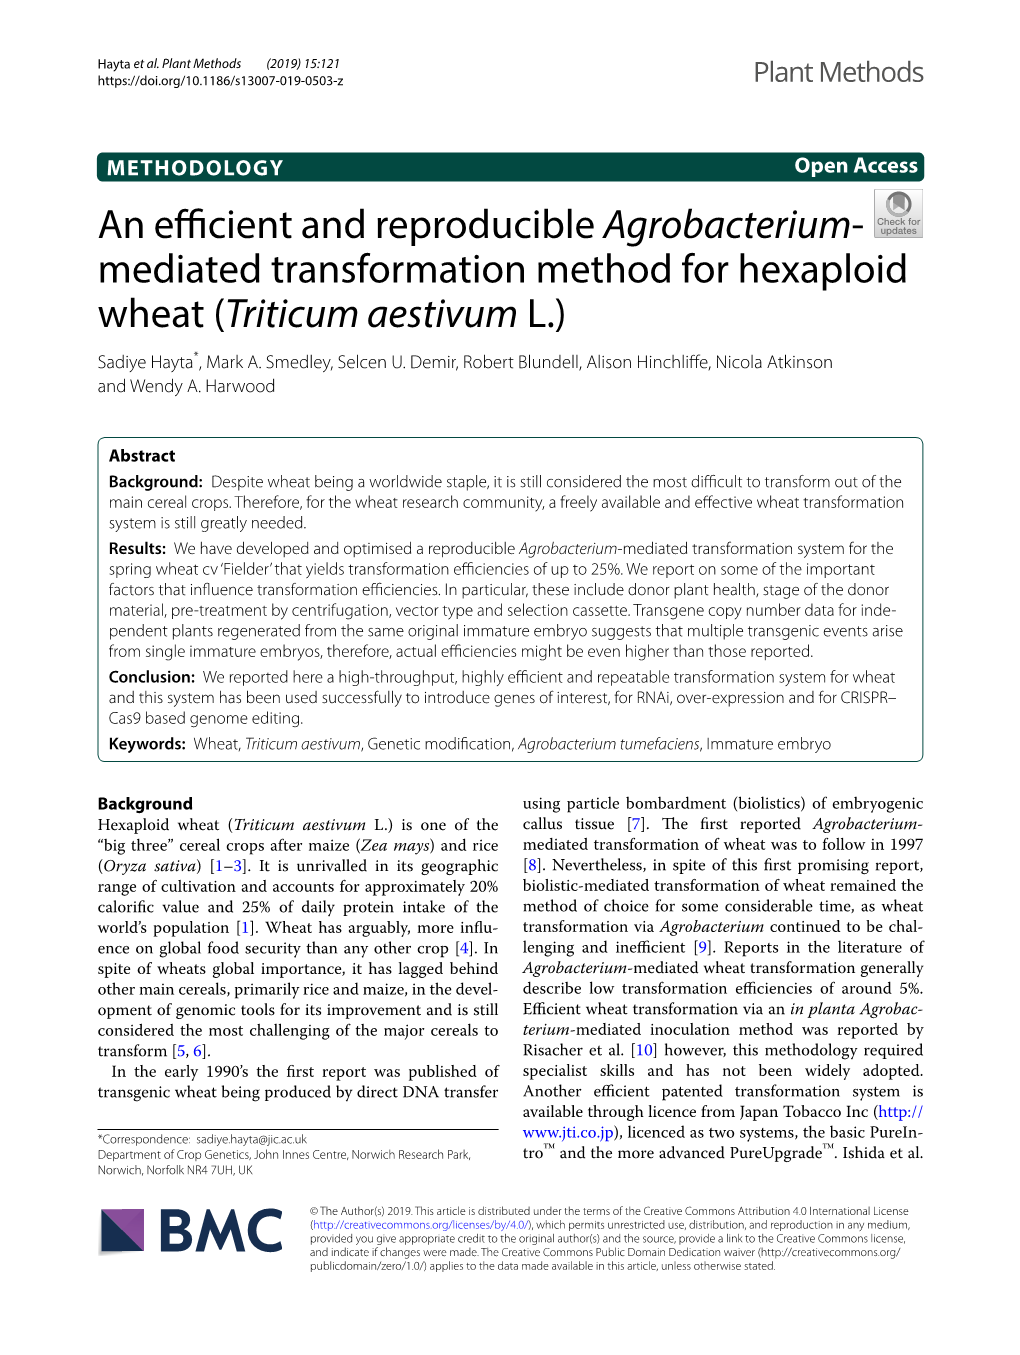 An Efficient and Reproducible Agrobacterium